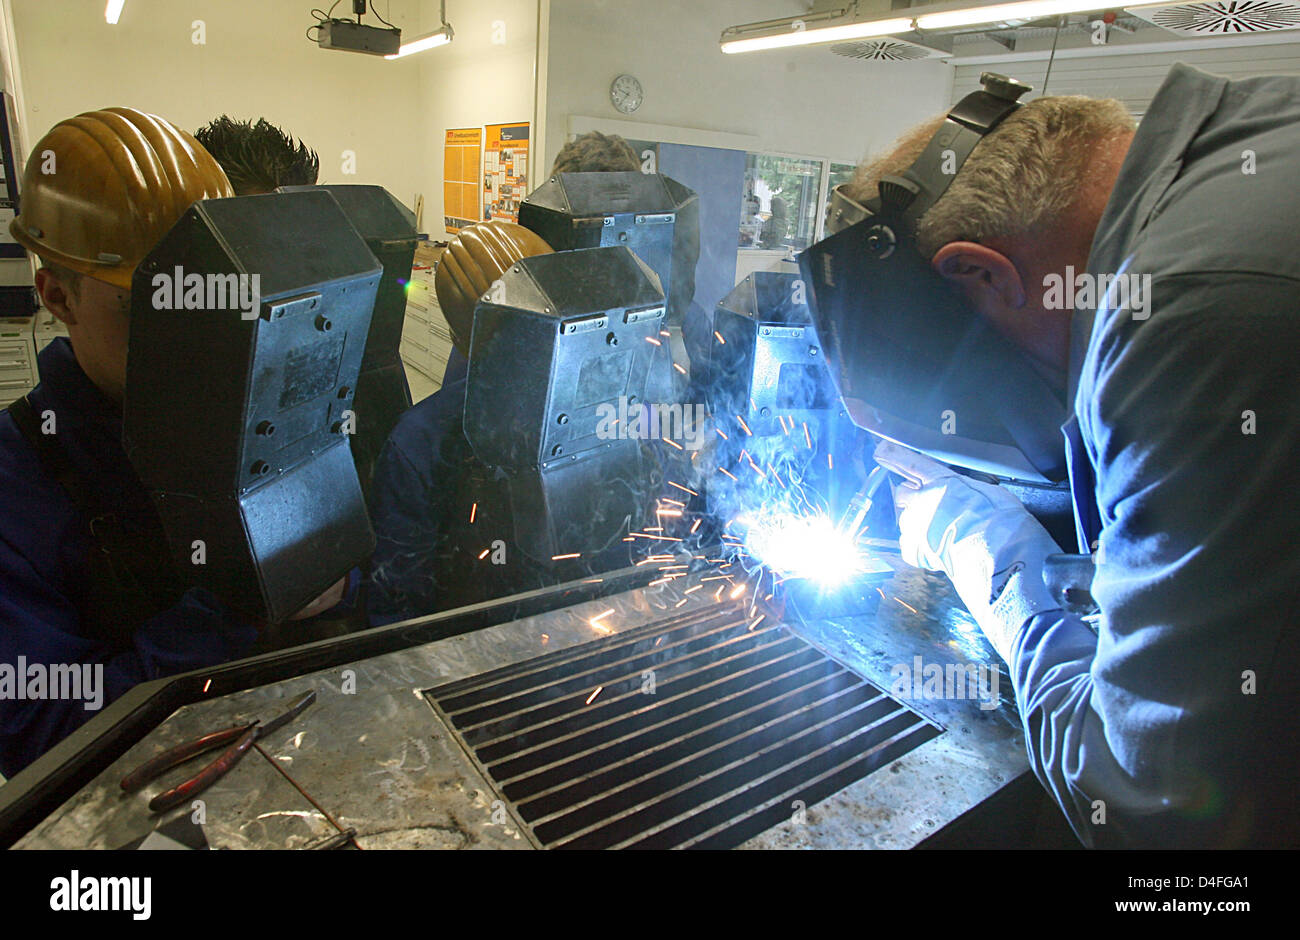 Trainees practice gas-shielded welding at Mercedes-Benz' vocational training centre in Esslingen-Bruehl, Germany, 6 July 2008. By 31 December 2007 some 1,110 young people were trained in technical and commercial vocations and BA courses, among them 110 women. More than 50 teachers and master craftmen teach at the centre. Photo: Norbert Foersterling Stock Photo